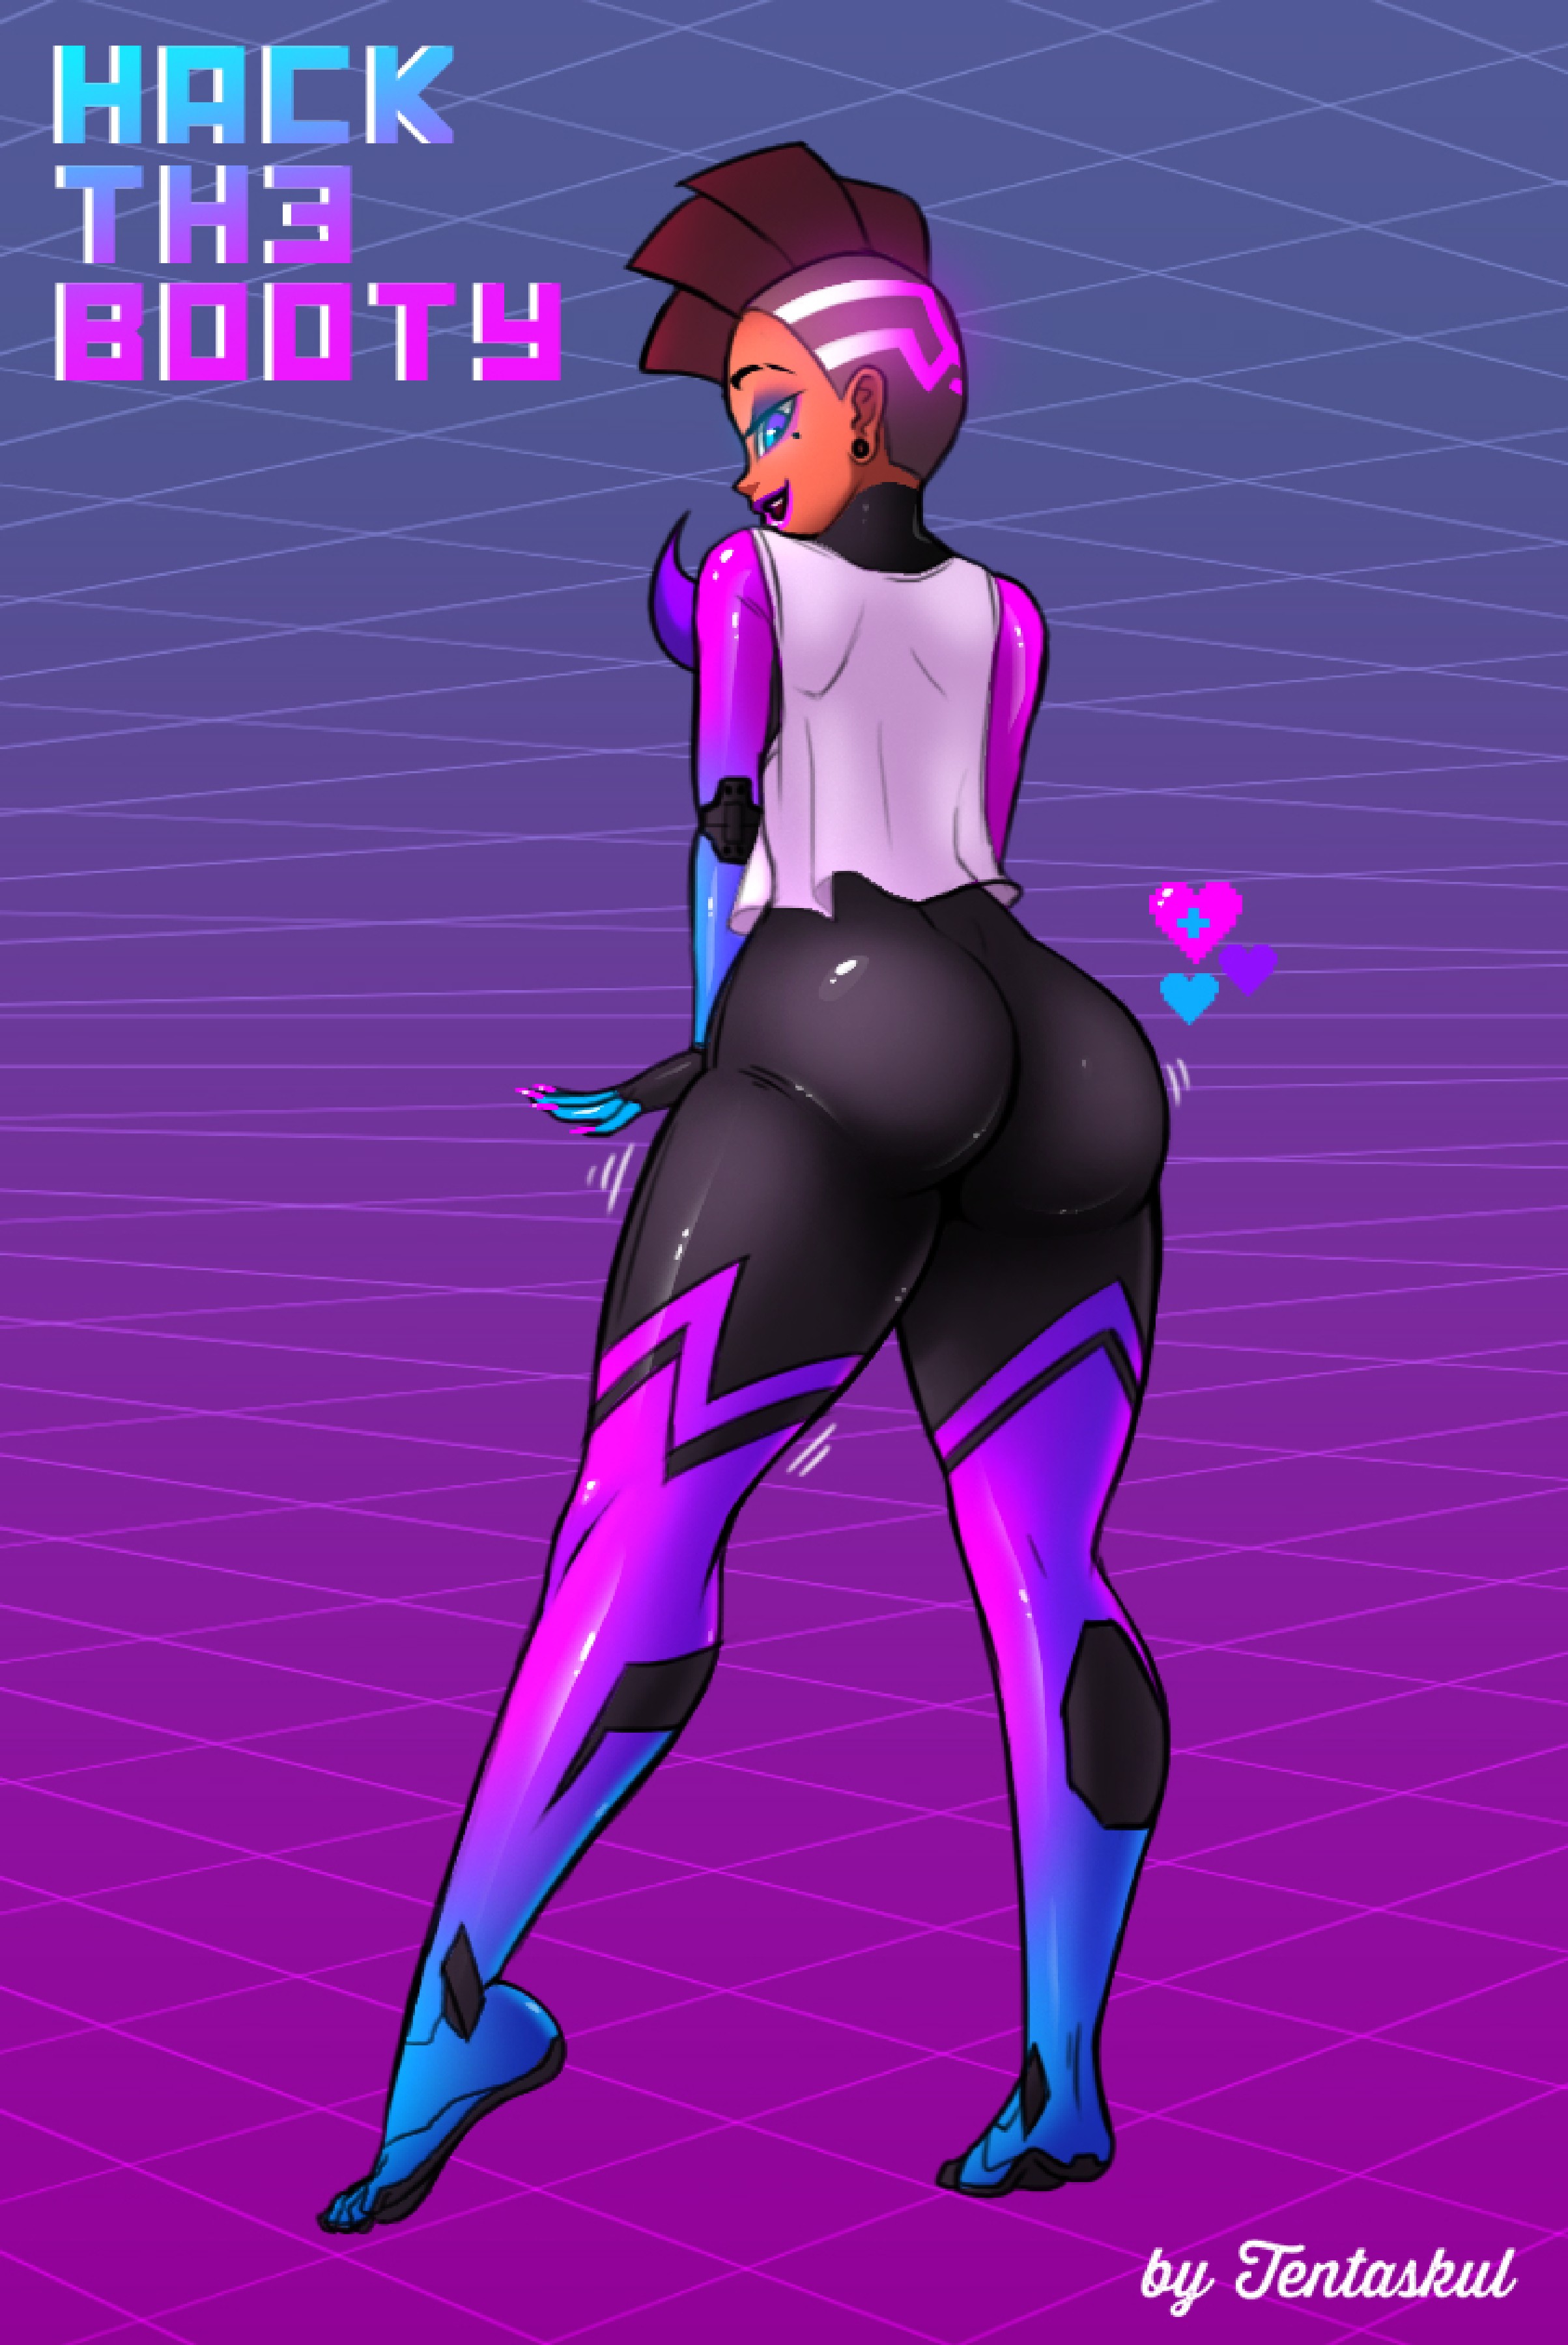 Sexy Sombra in adult comic by Tentaskul - Hack the Booty - Overwatch parody 2017